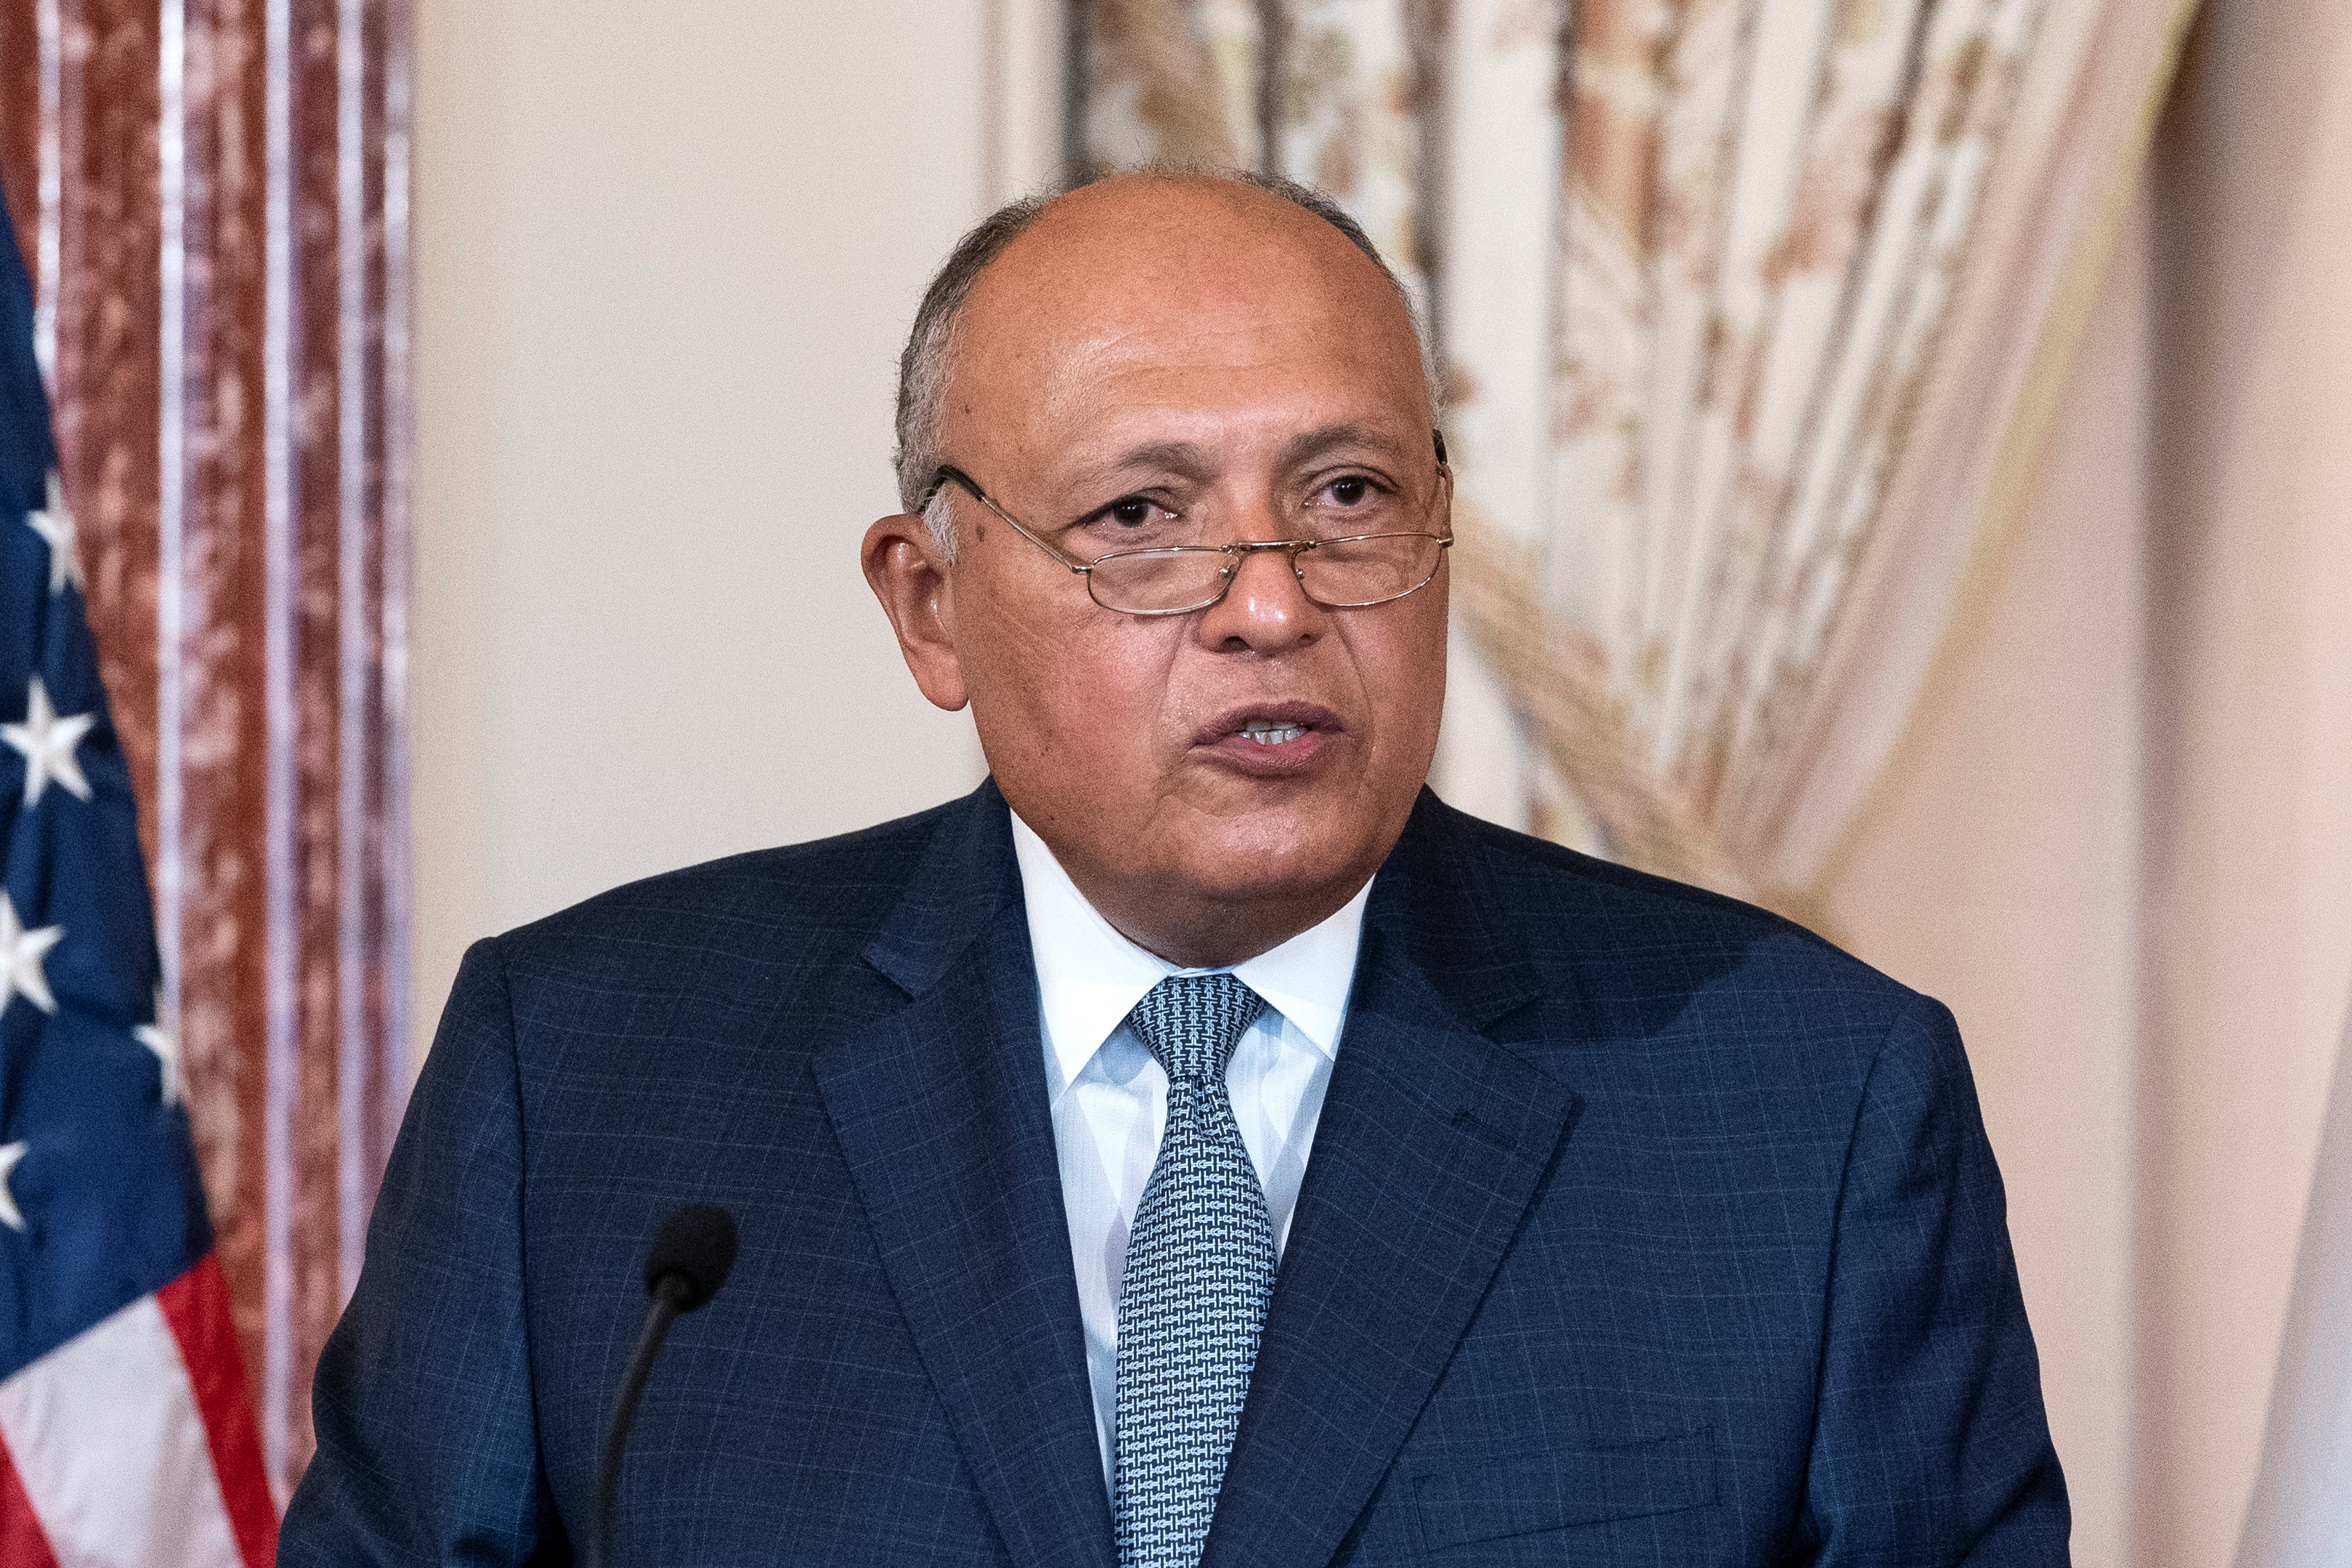 Egyptian Foreign Minister Sameh Shoukry speaks during a U.S.-Egypt strategic dialogue with Secretary of State Antony Blinken at the State Department